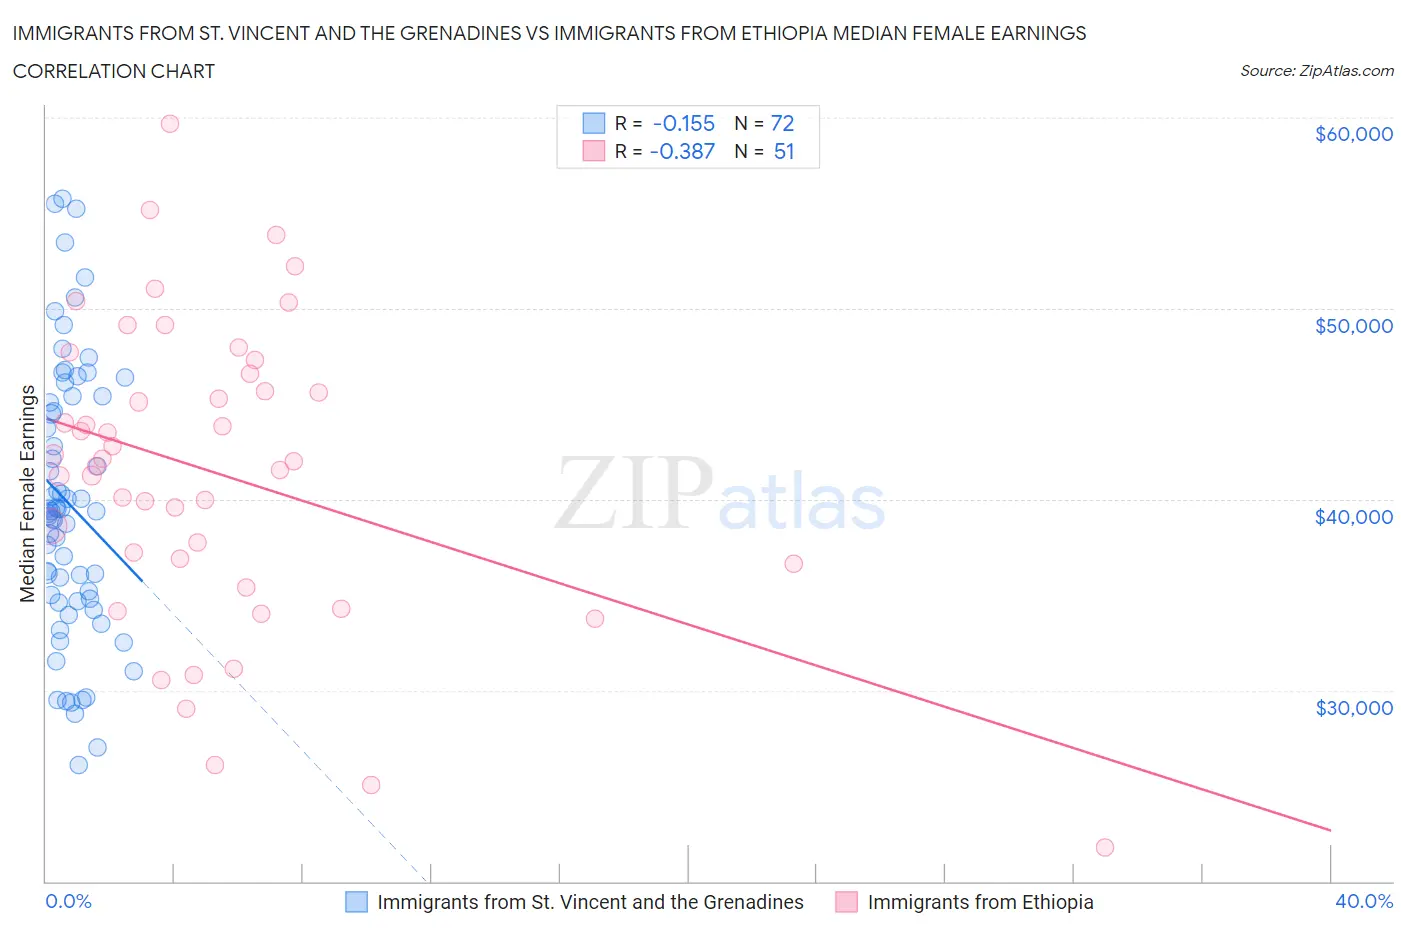 Immigrants from St. Vincent and the Grenadines vs Immigrants from Ethiopia Median Female Earnings